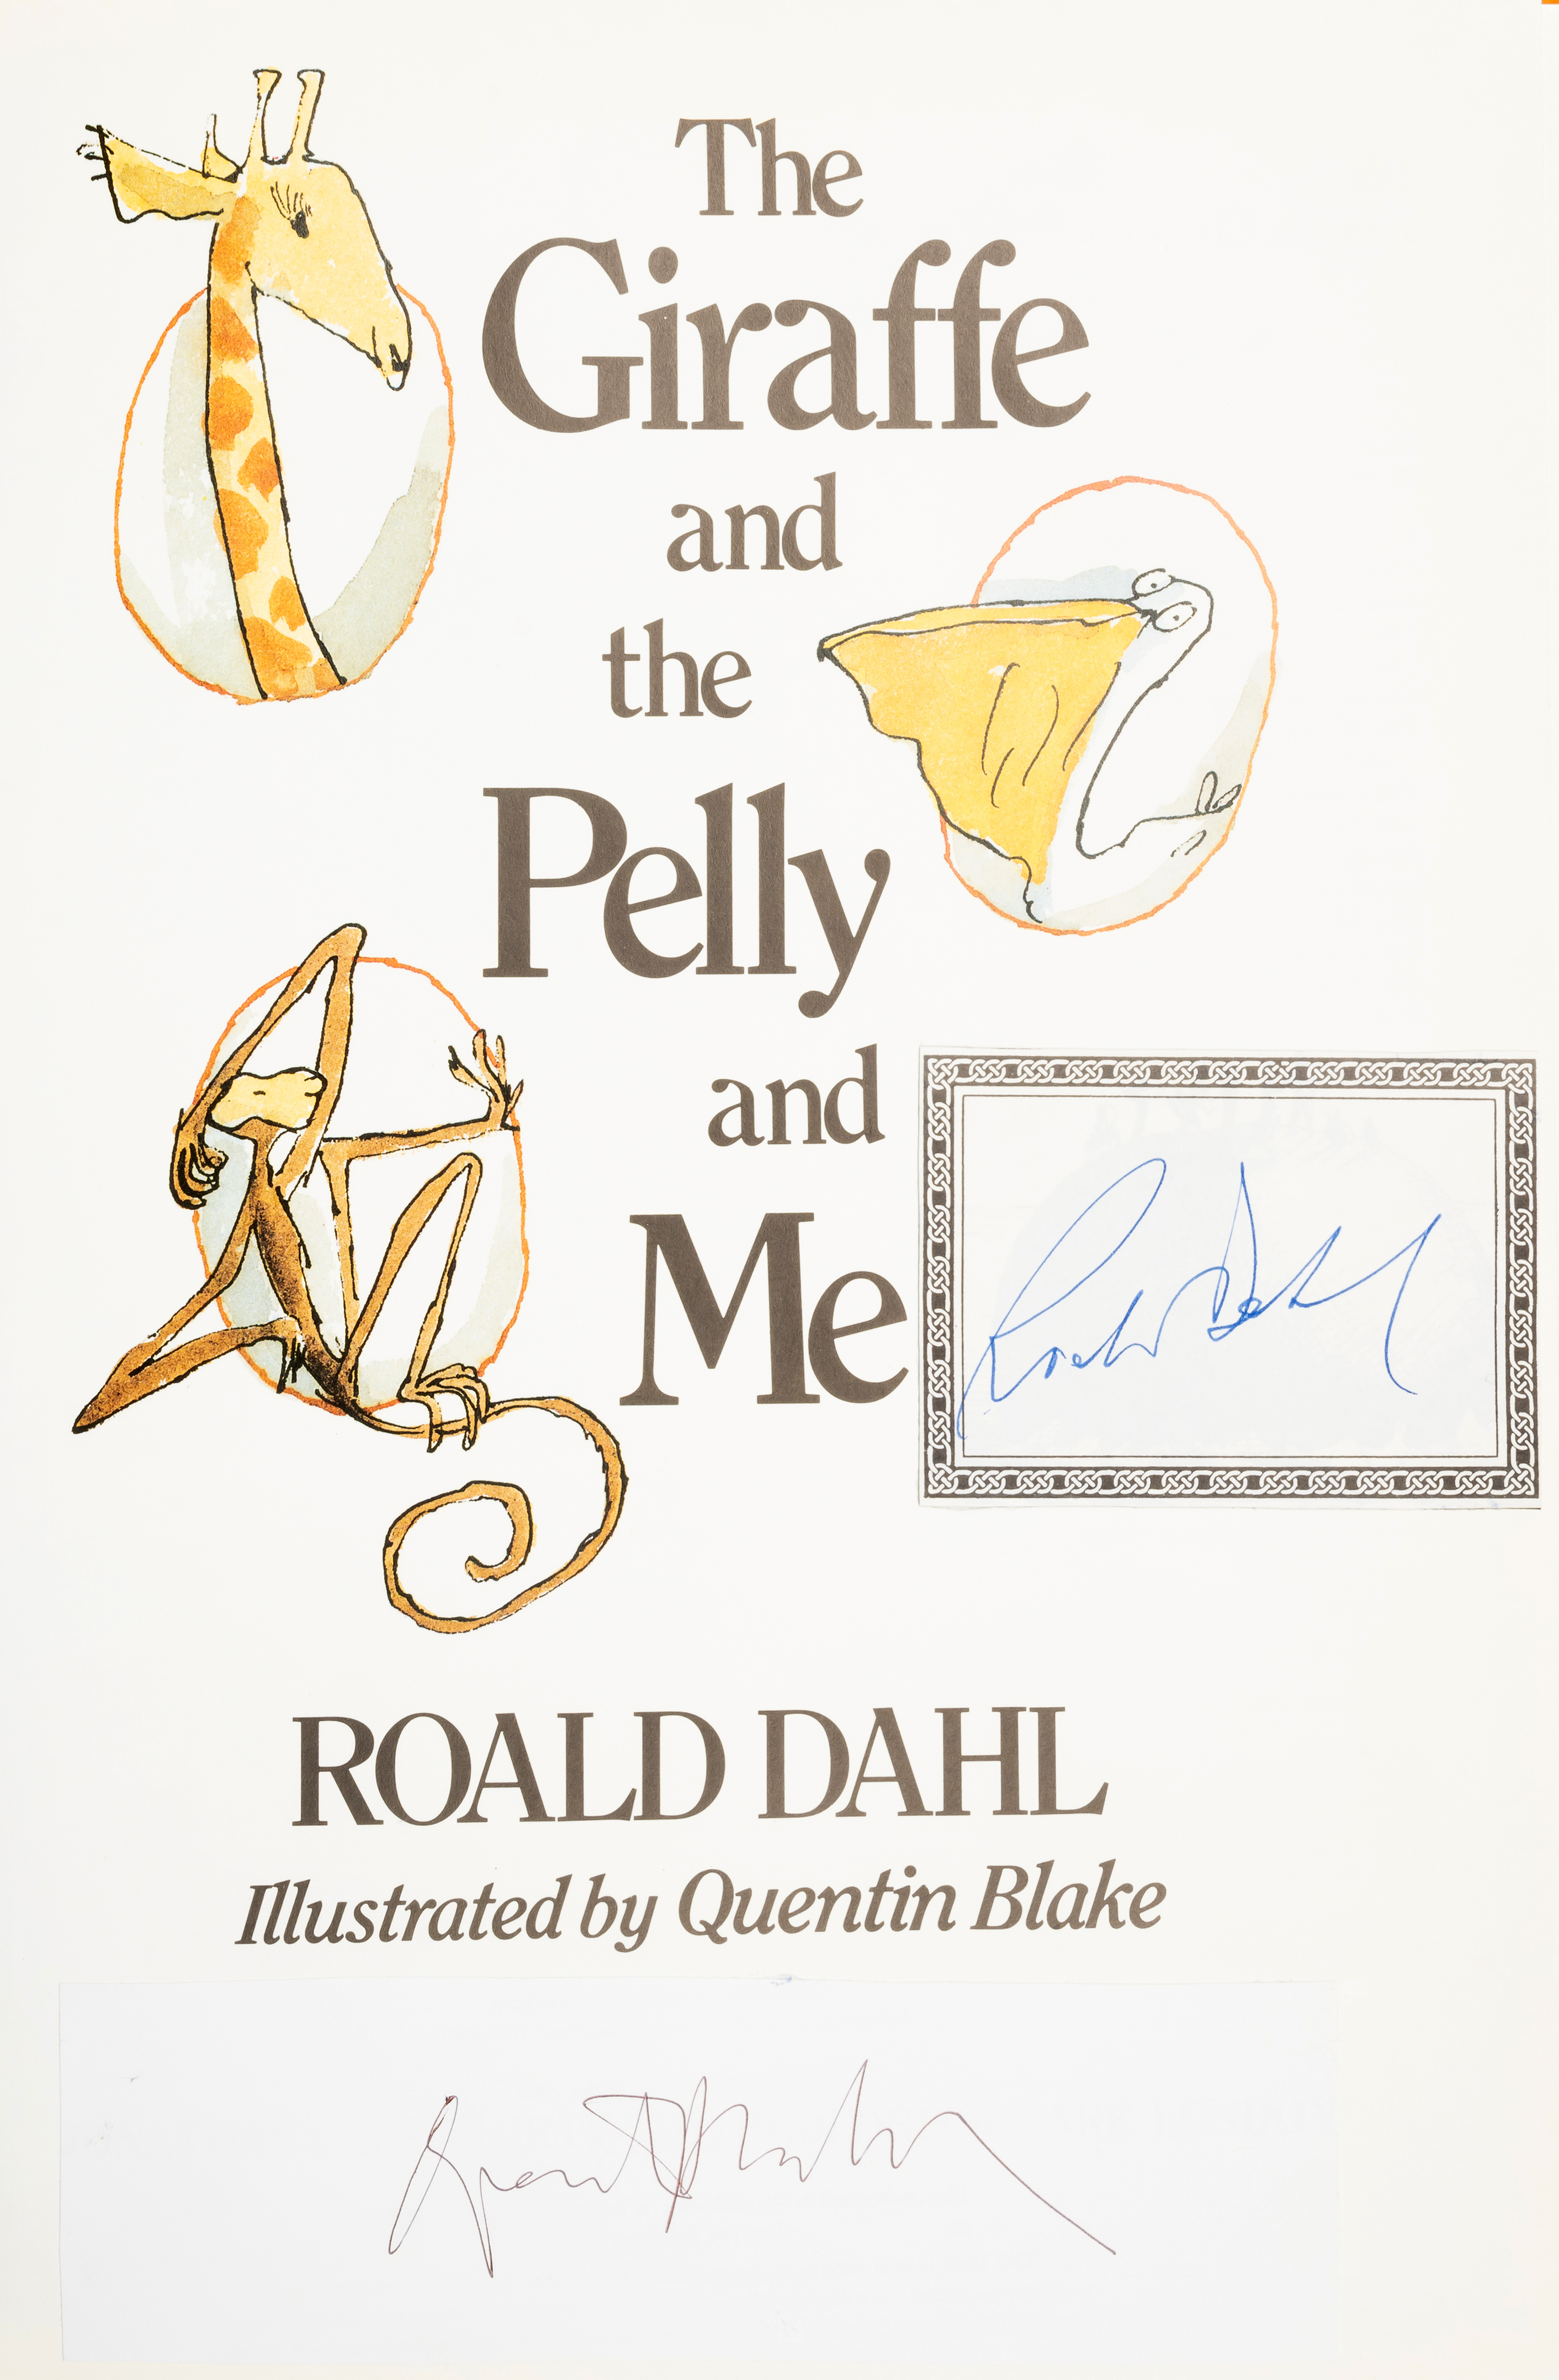 Dahl (Roald) The Giraffe and the Pelly and Me, first edition, cut signatures of Dahl and Blake on... - Image 2 of 2